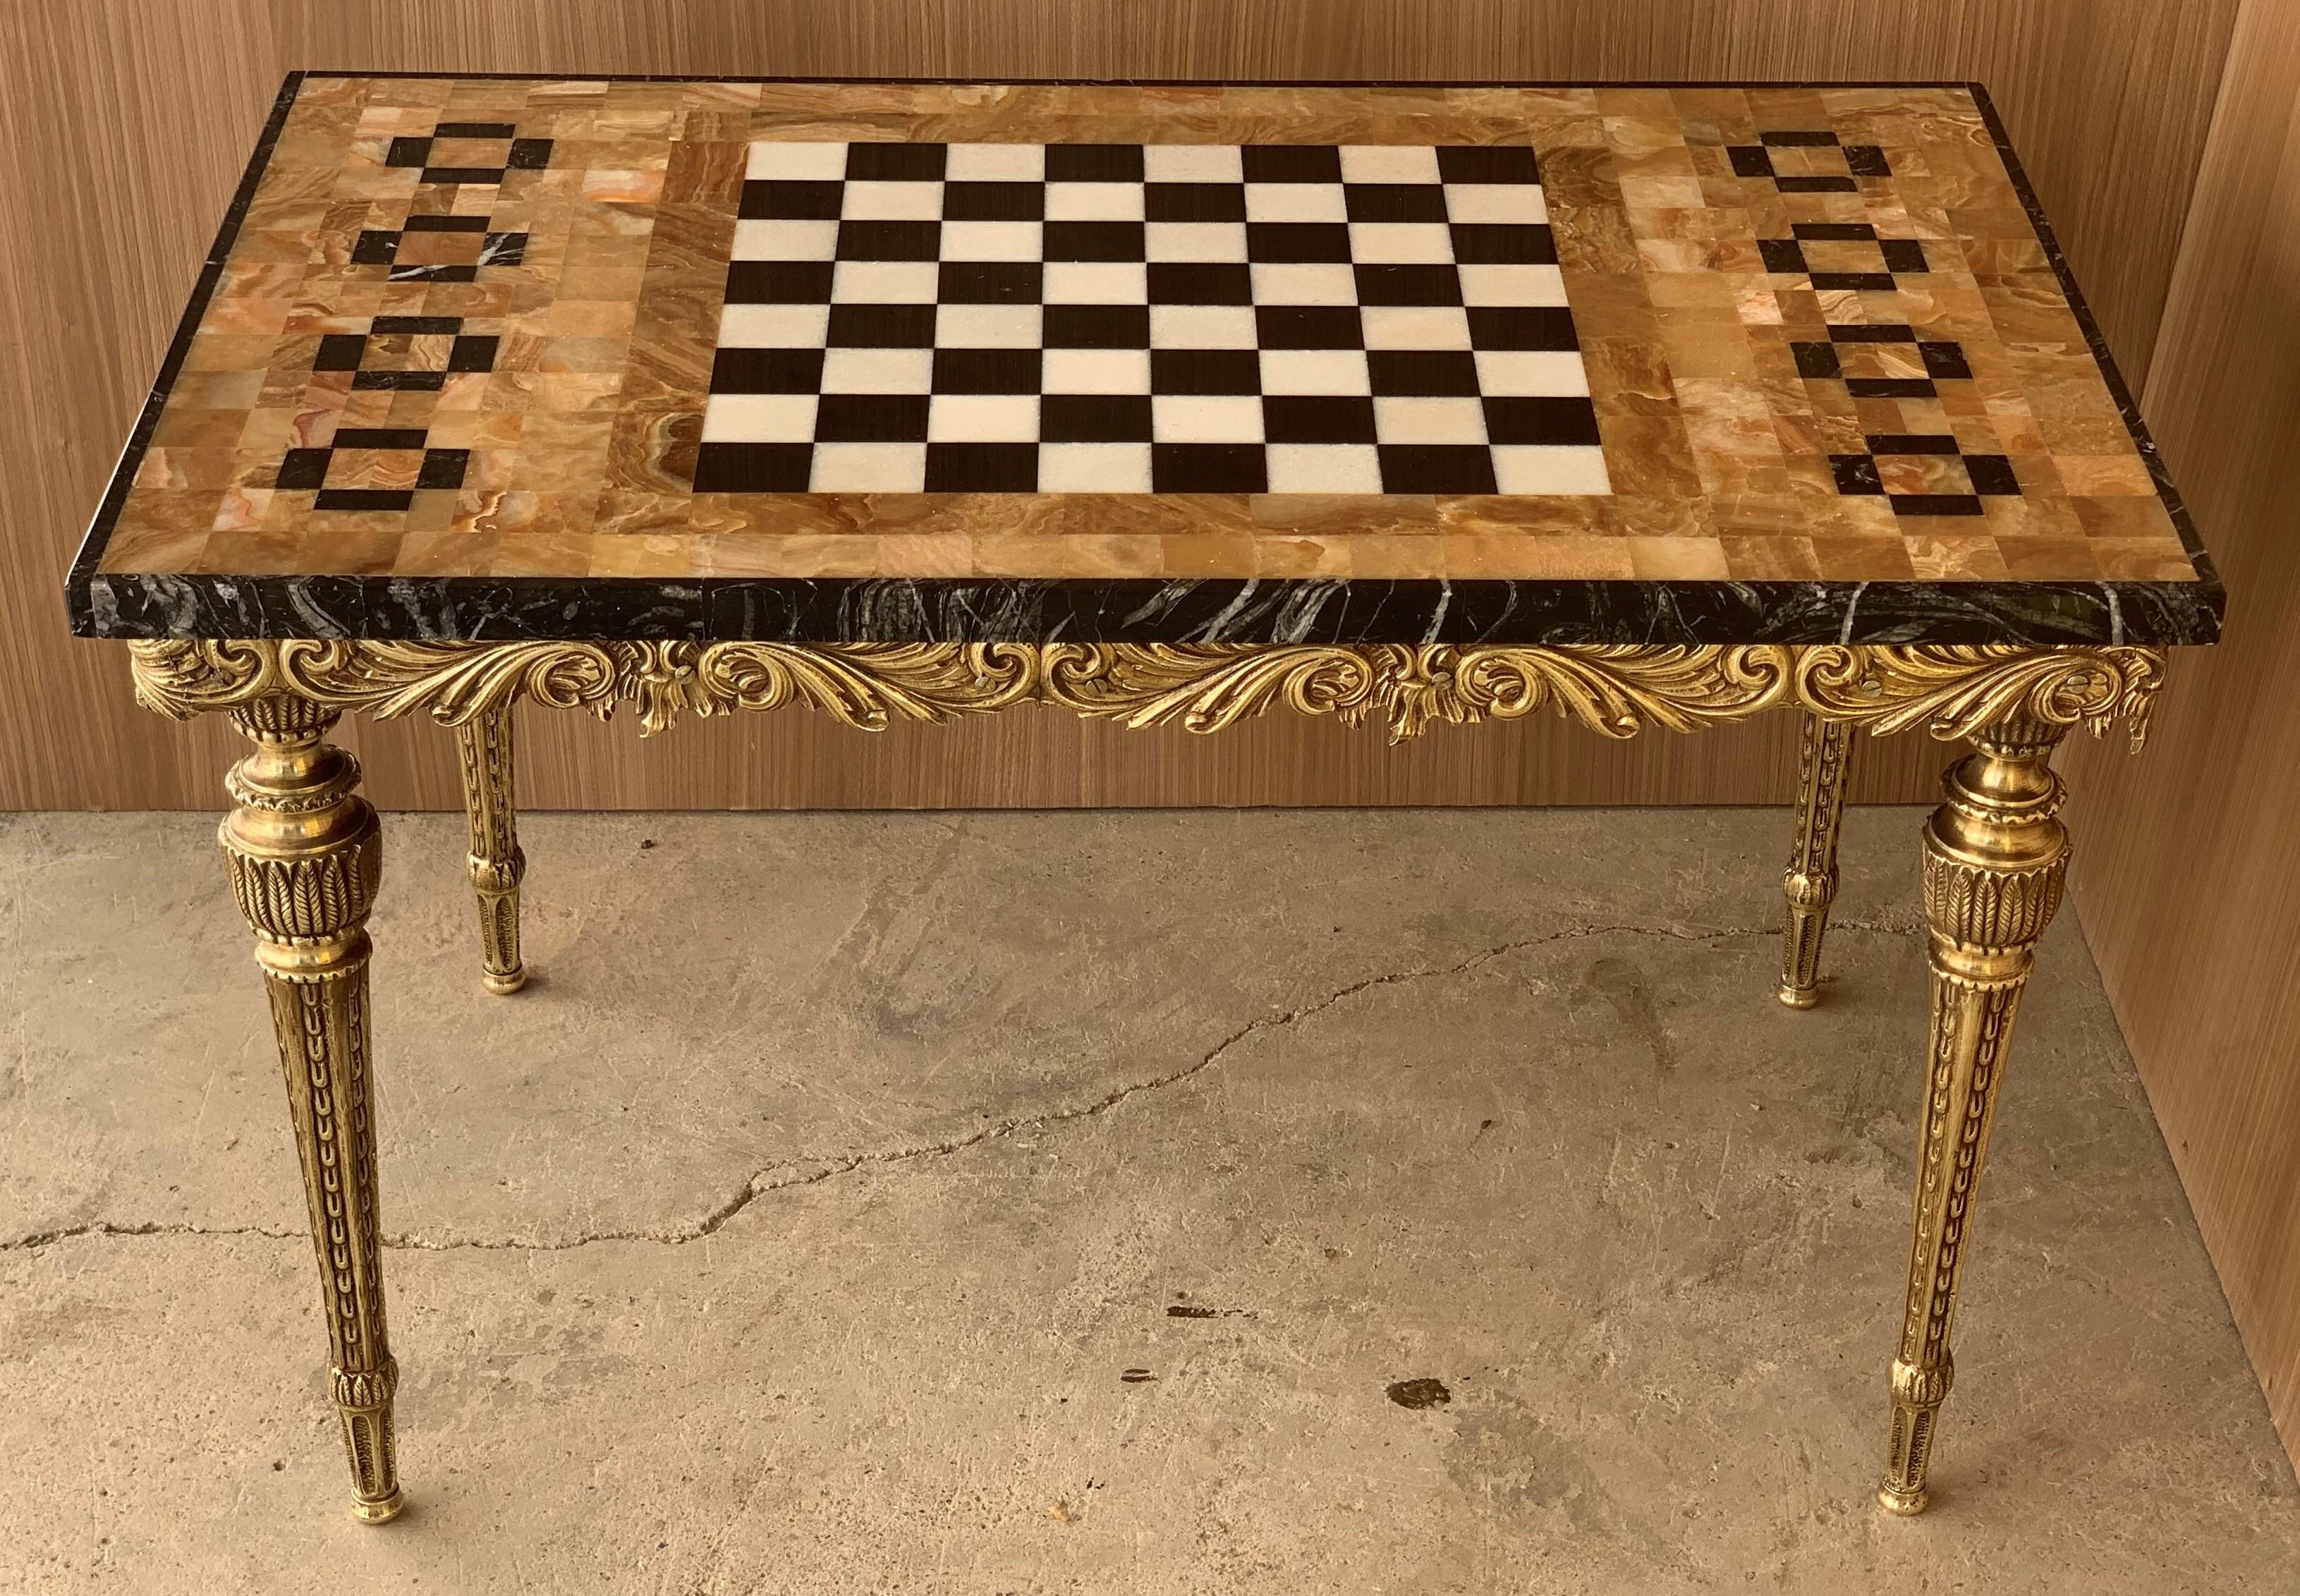 20th century bronze game of chess with marble and bronze table
Top marble in perfect shape with beautiful ormolu-mounted bronze edges and solid bronze legs.